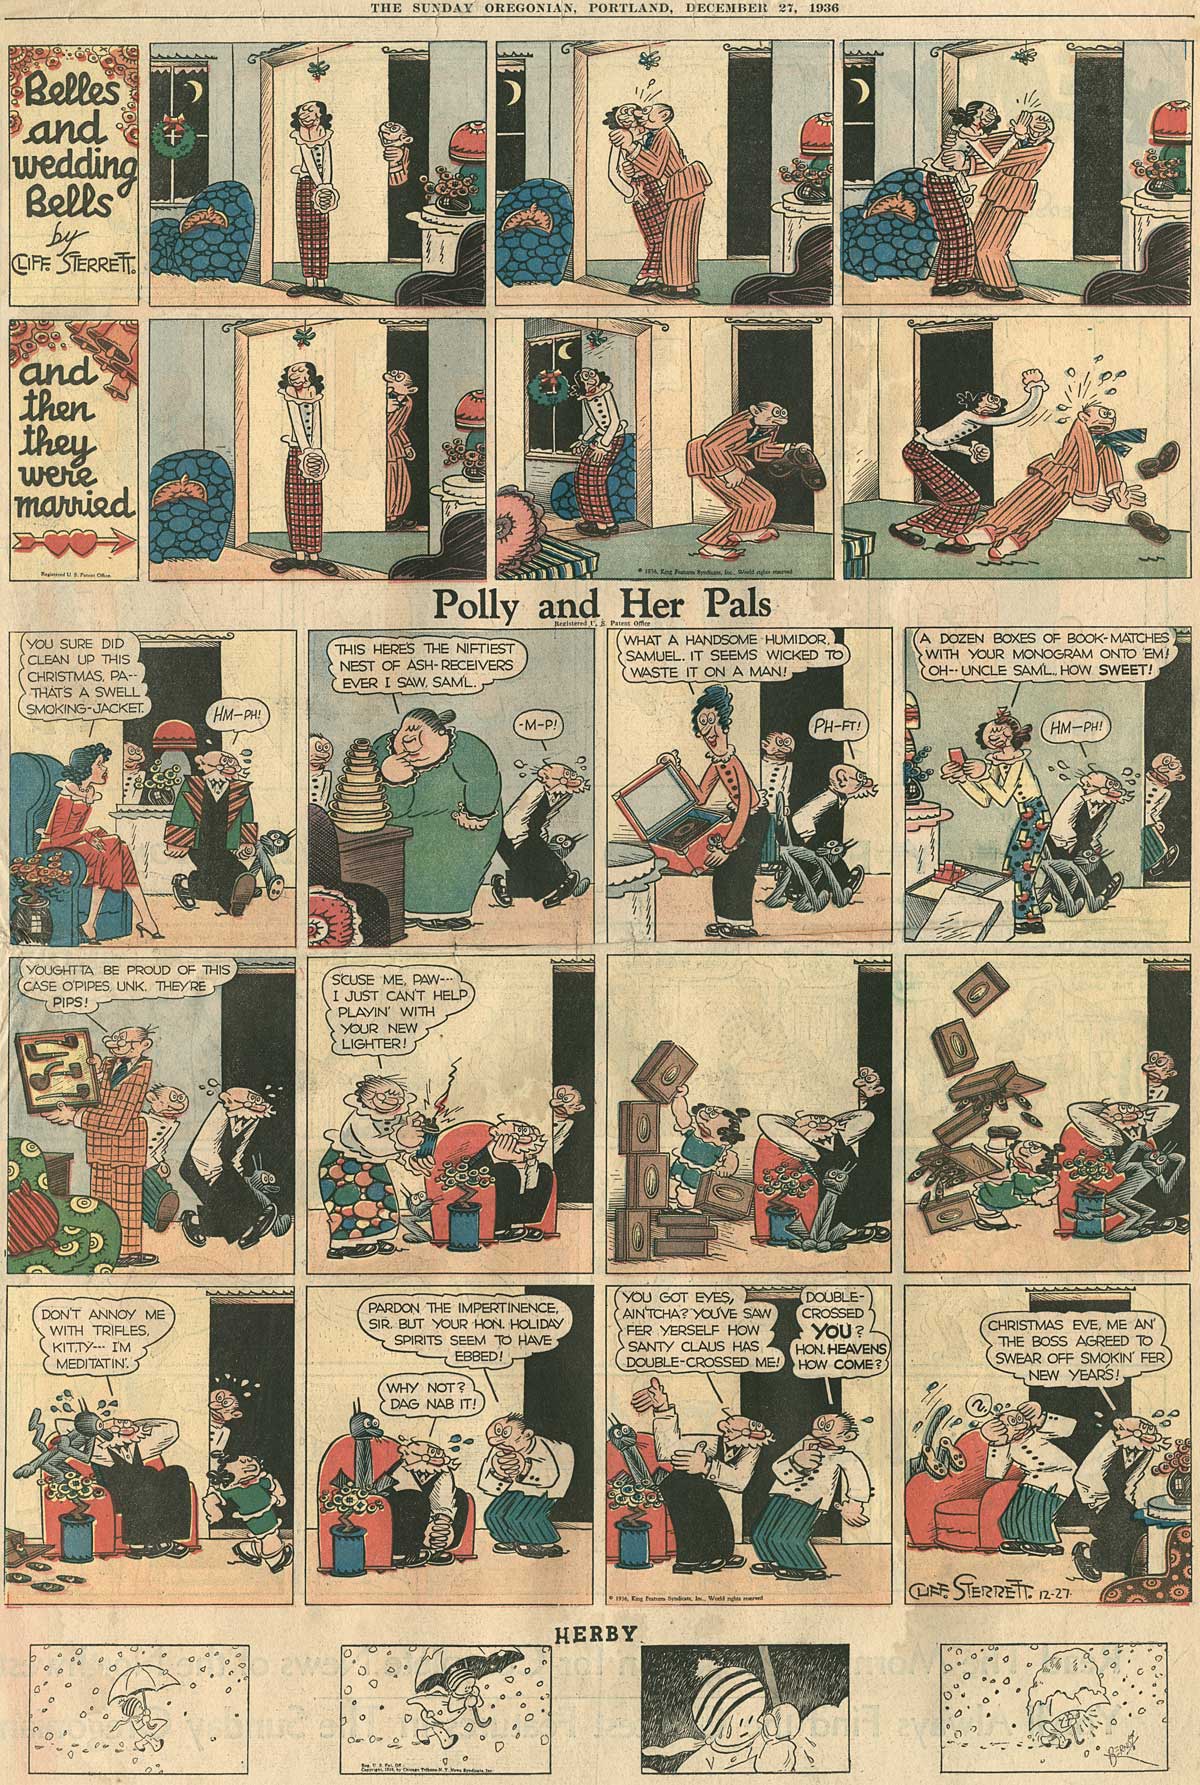 Comic Strips Cliff Sterrett S Polly And Her Pals Serving The Online